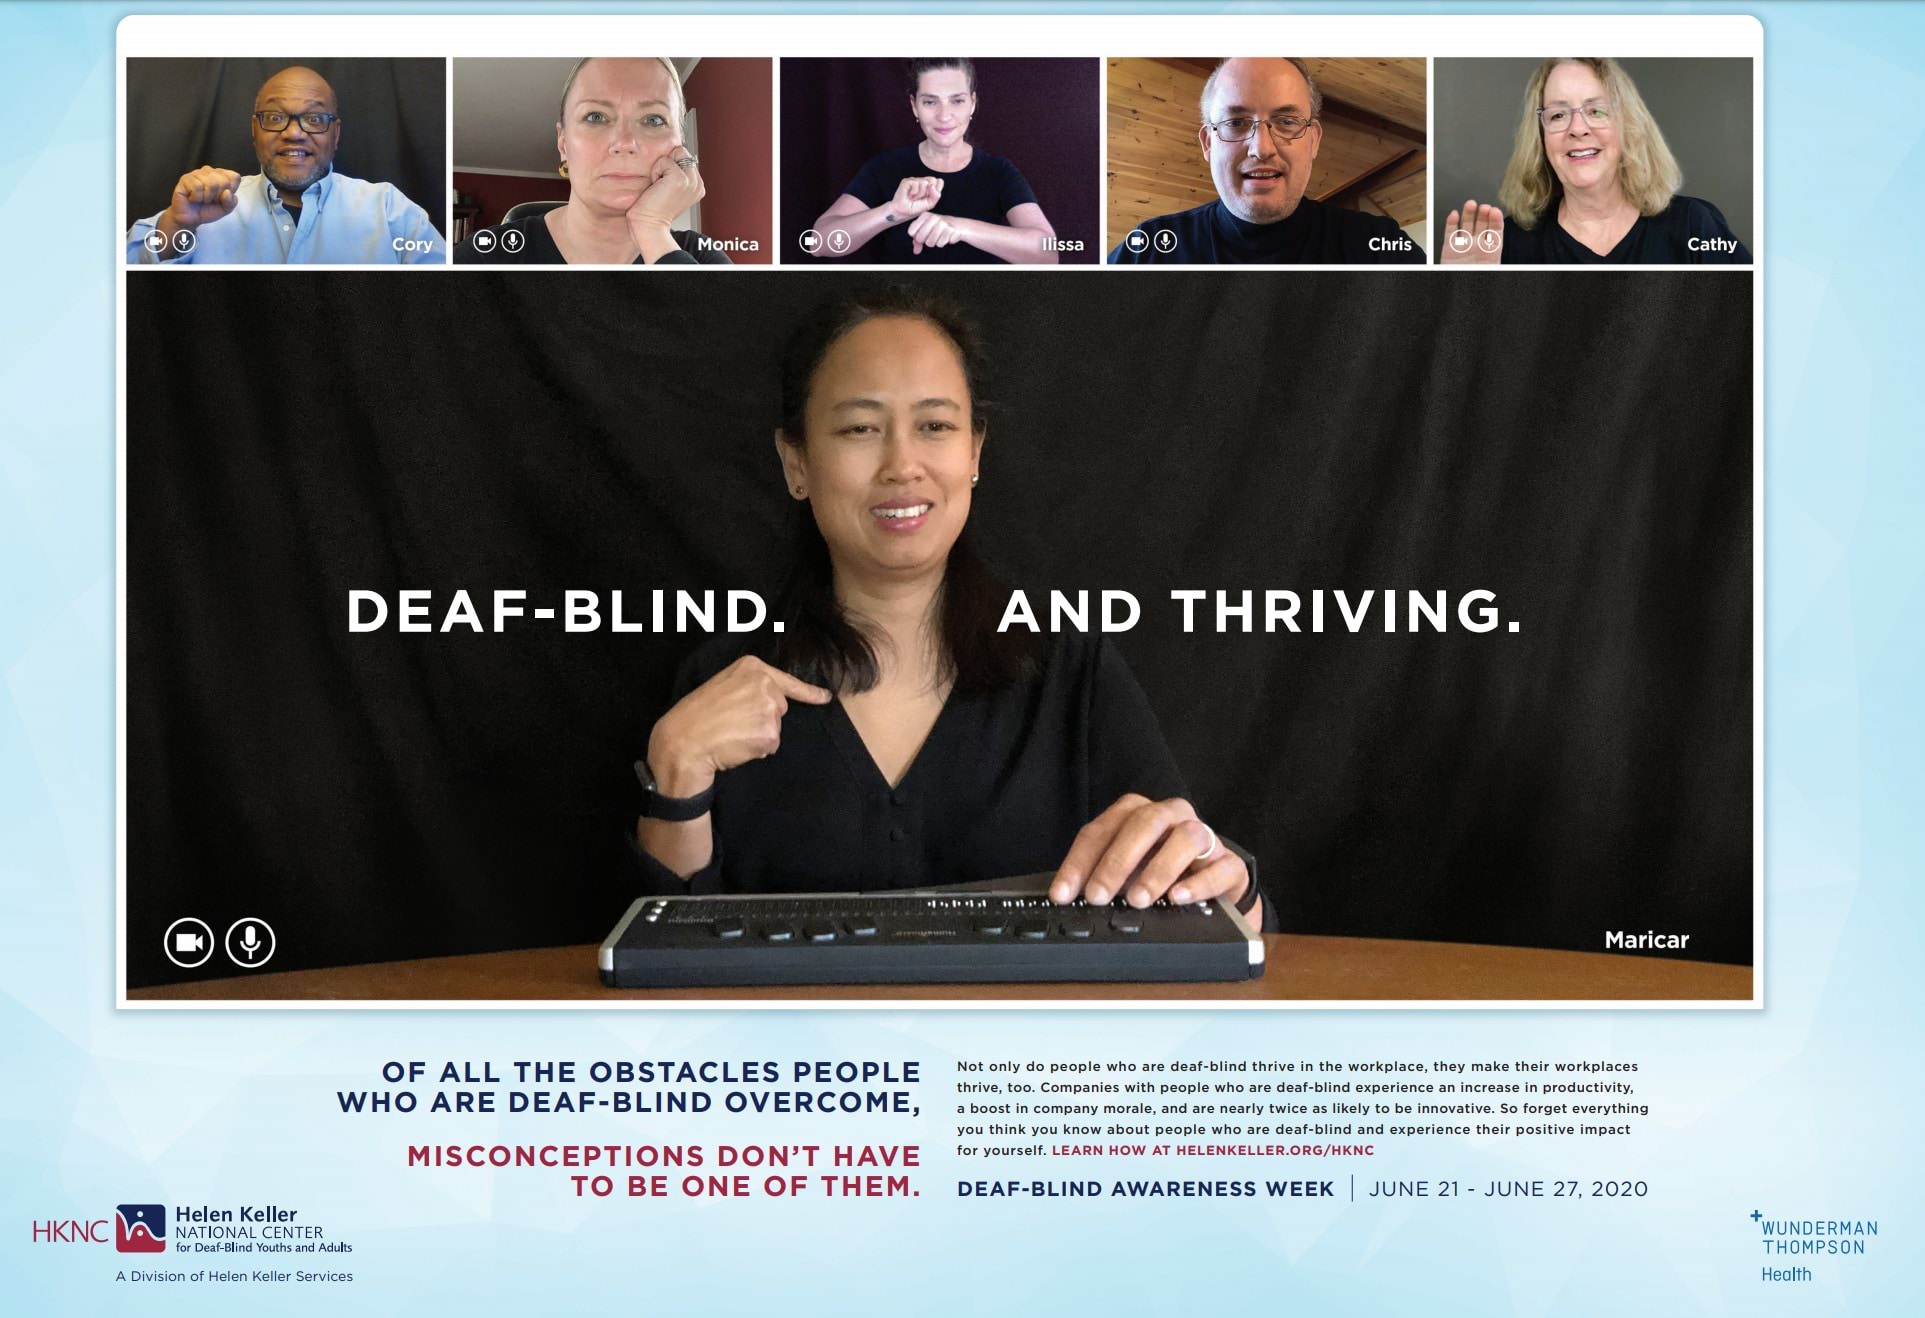 A screenshot of a zoom call with a woman in the center in a larger box. There are 5 other people in smaller squares across the top of the page. The words beneath the pictures says, "Of all the obstacles people who are deaf-blind overcome, misconceptions don't have to be one of them."